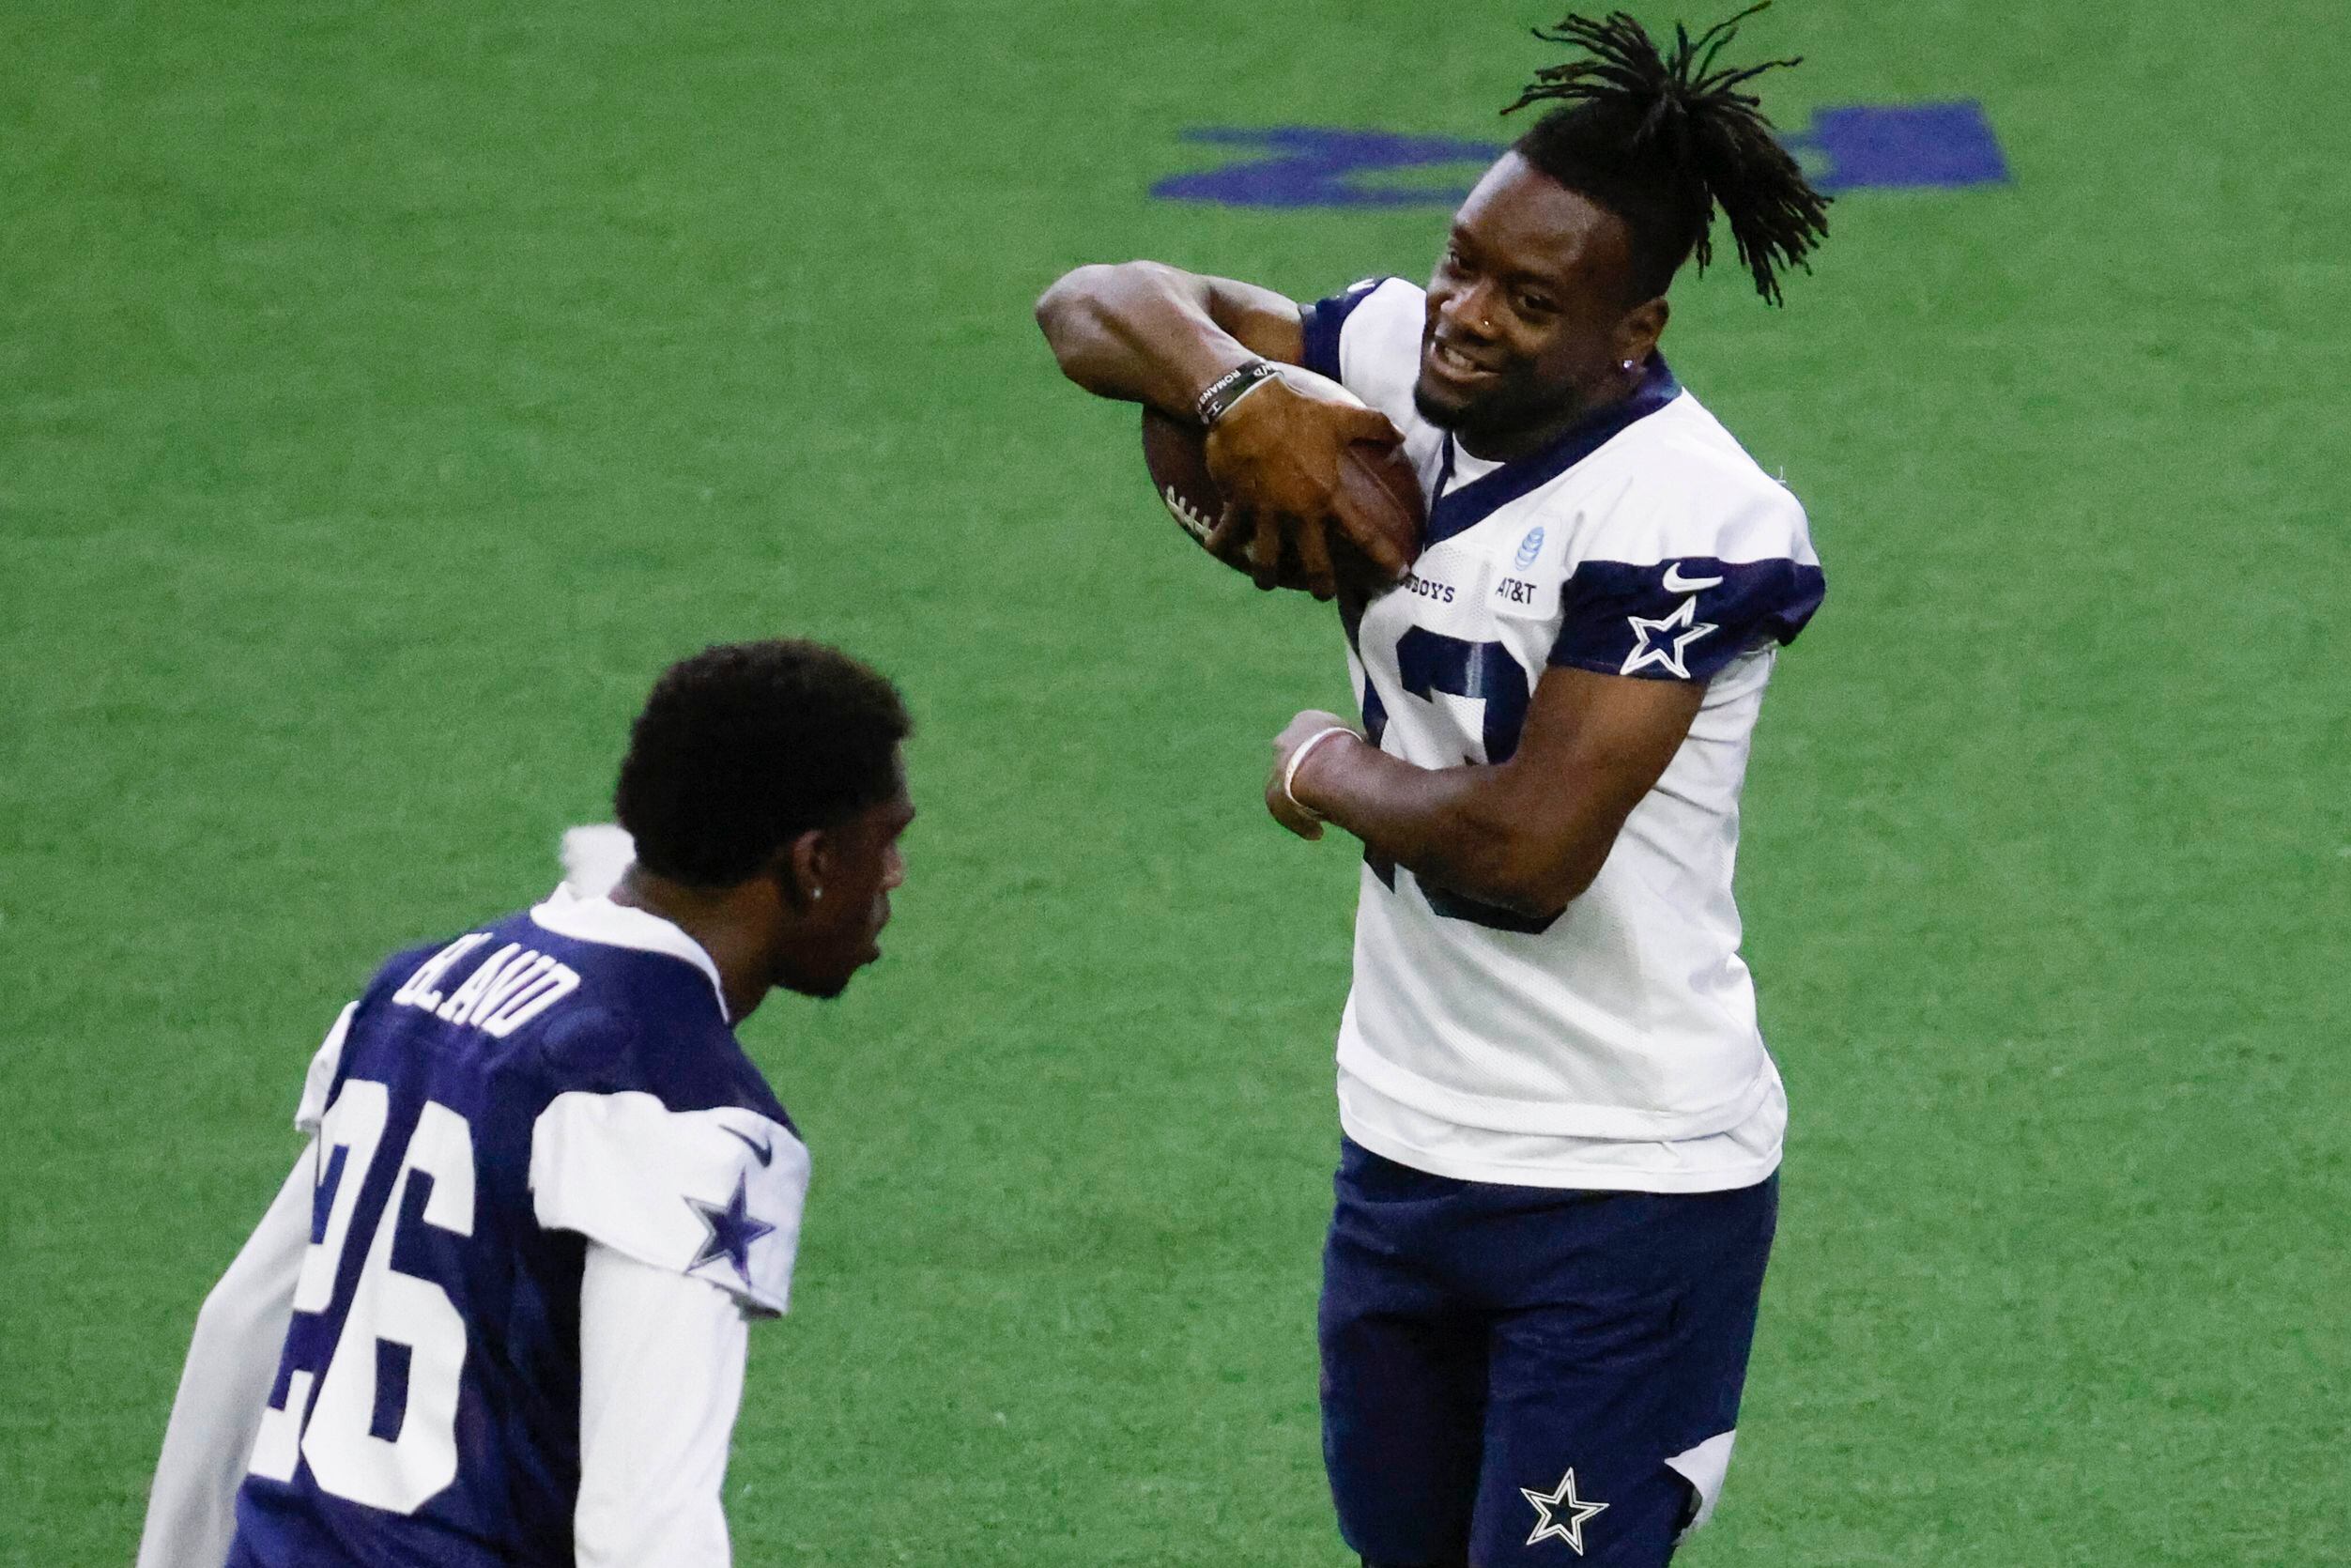 Dallas Cowboys wide receiver Michael Gallup (13) reacts after catching a pass during a mini...